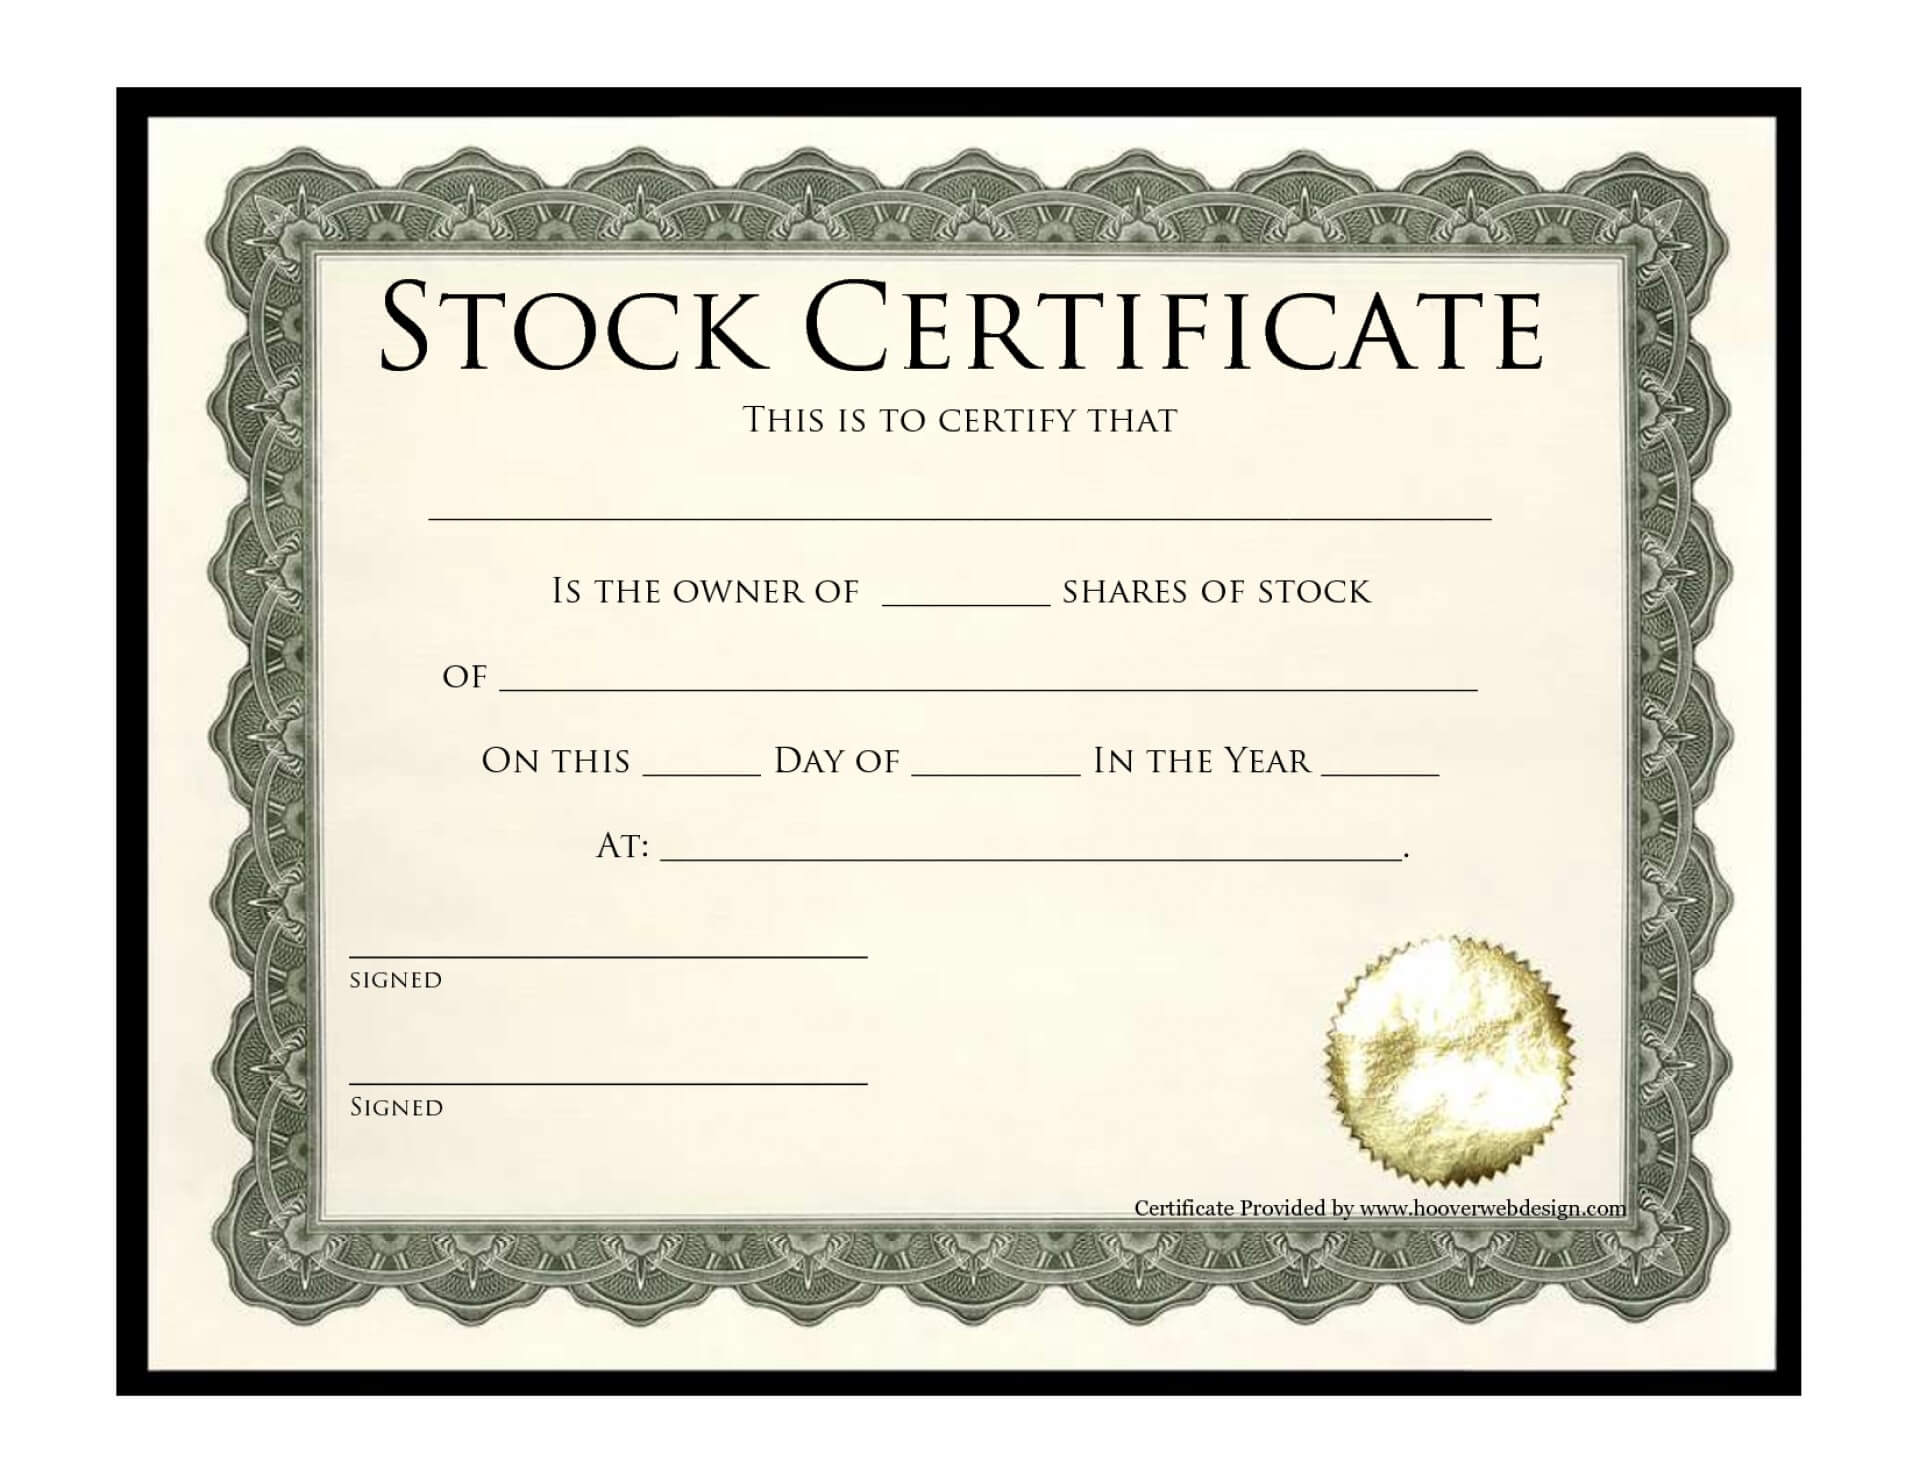 022 Free Stock Certificate Template Remarkable Ideas Form Throughout Stock Certificate Template Word